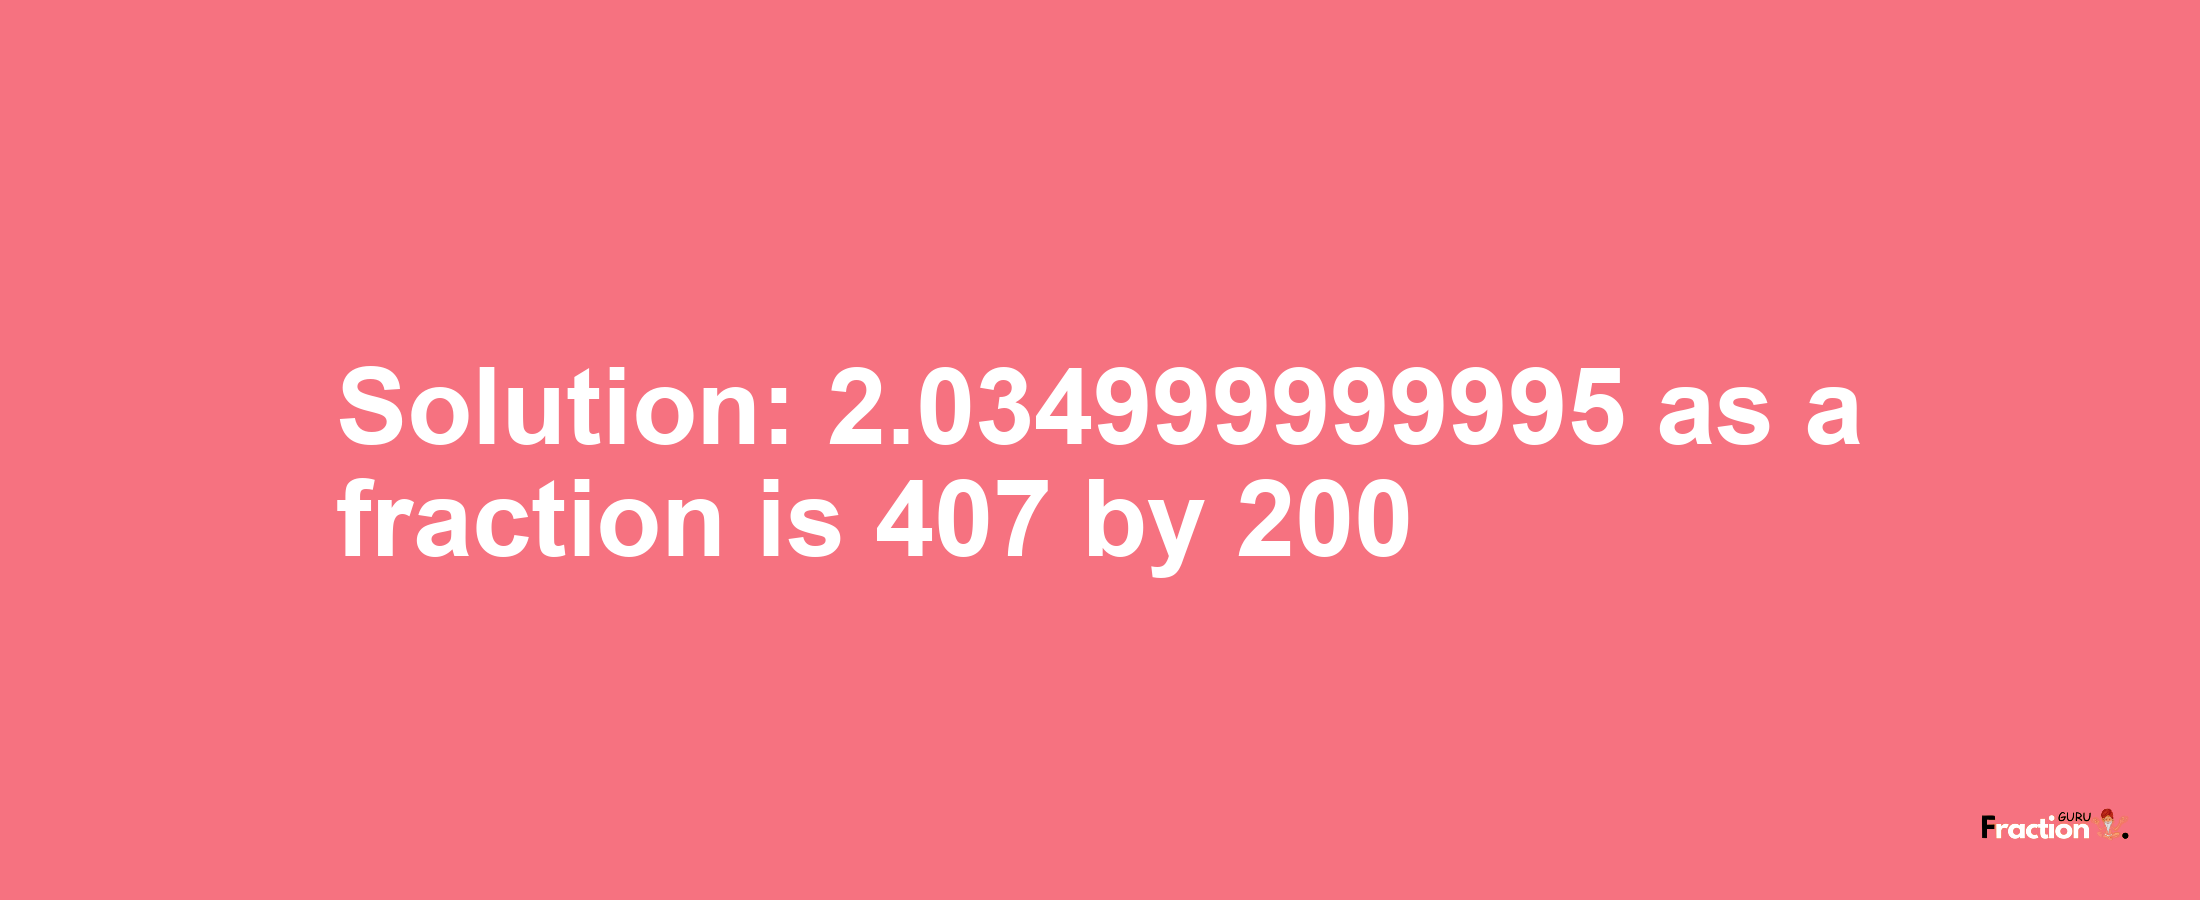 Solution:2.034999999995 as a fraction is 407/200